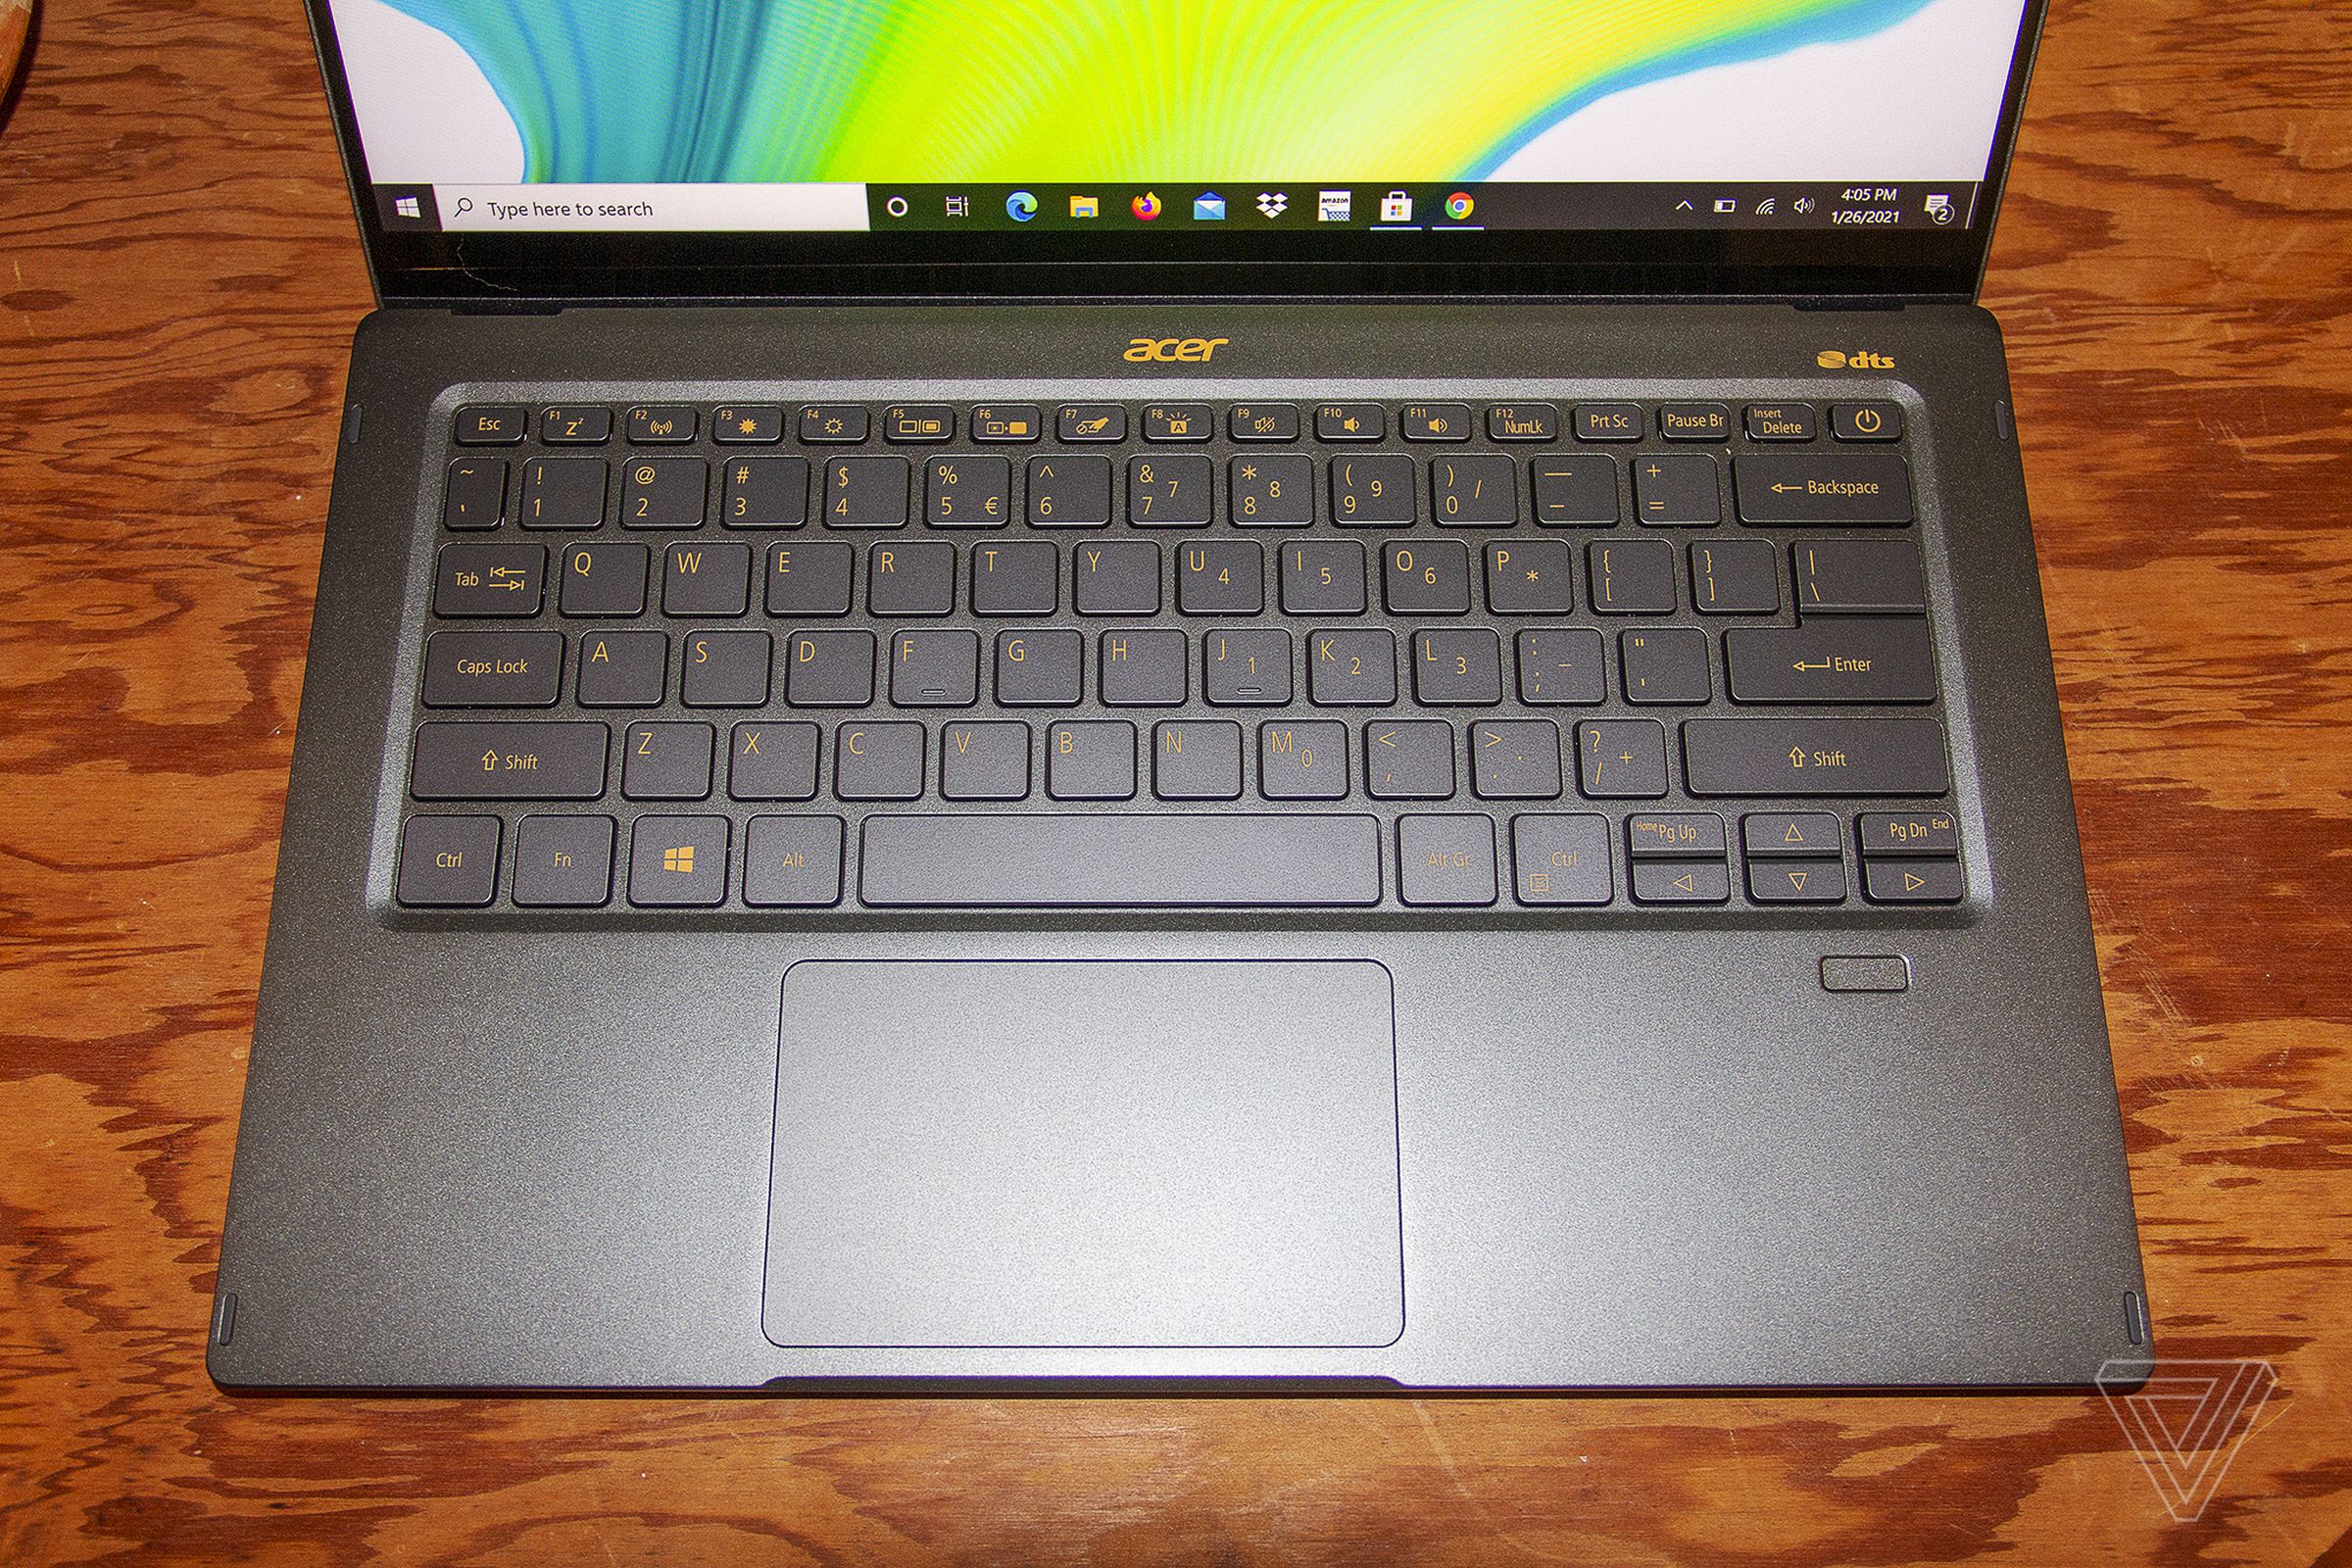 The Acer Swift 5 keyboard from above.